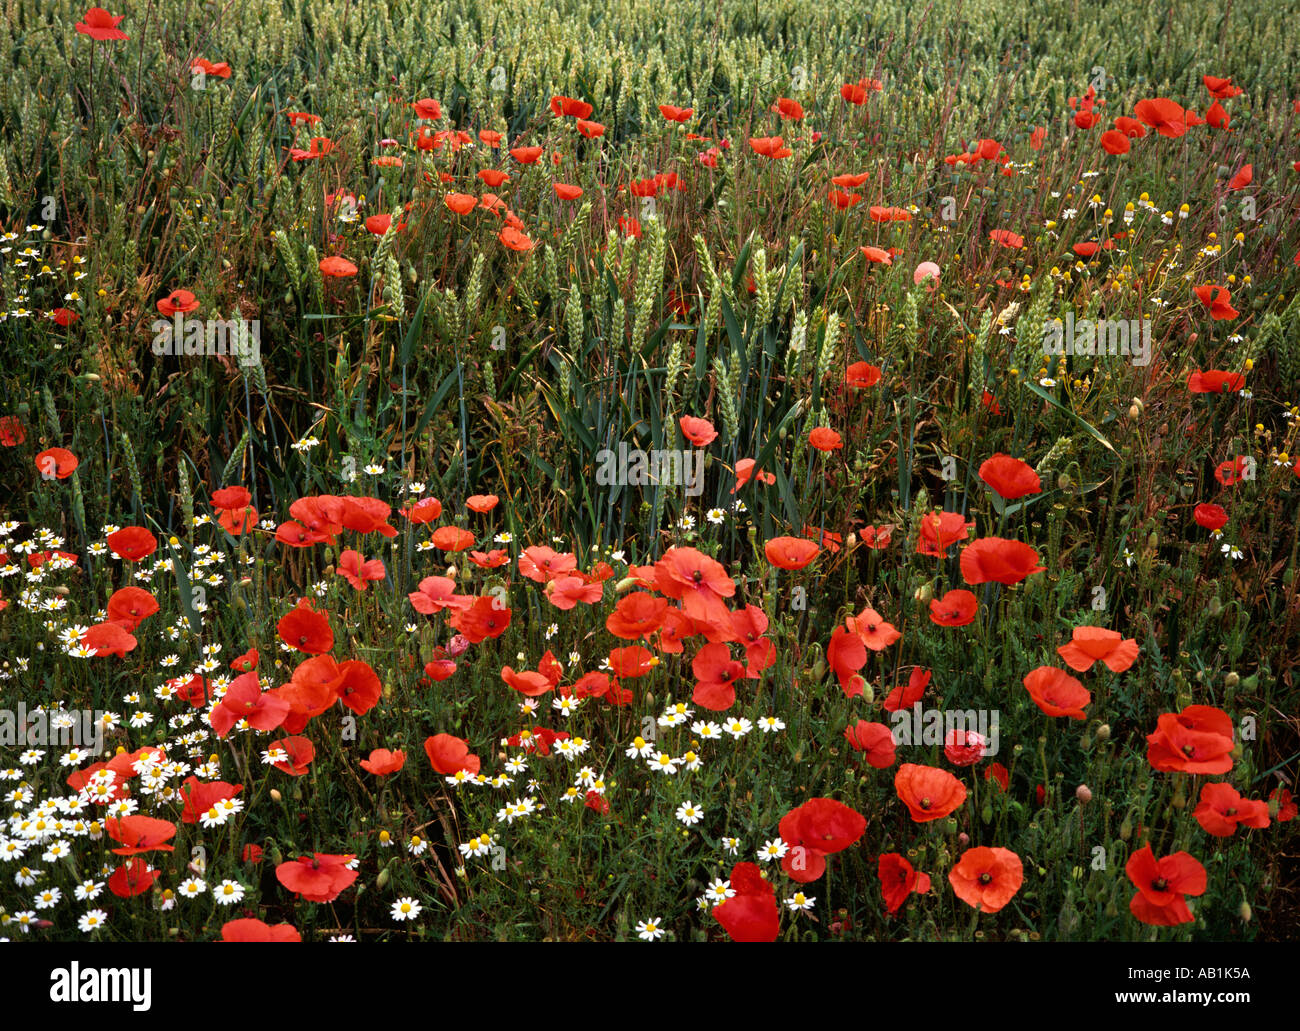 Kent poppies and wild flowers at edge of cornfield Stock Photo